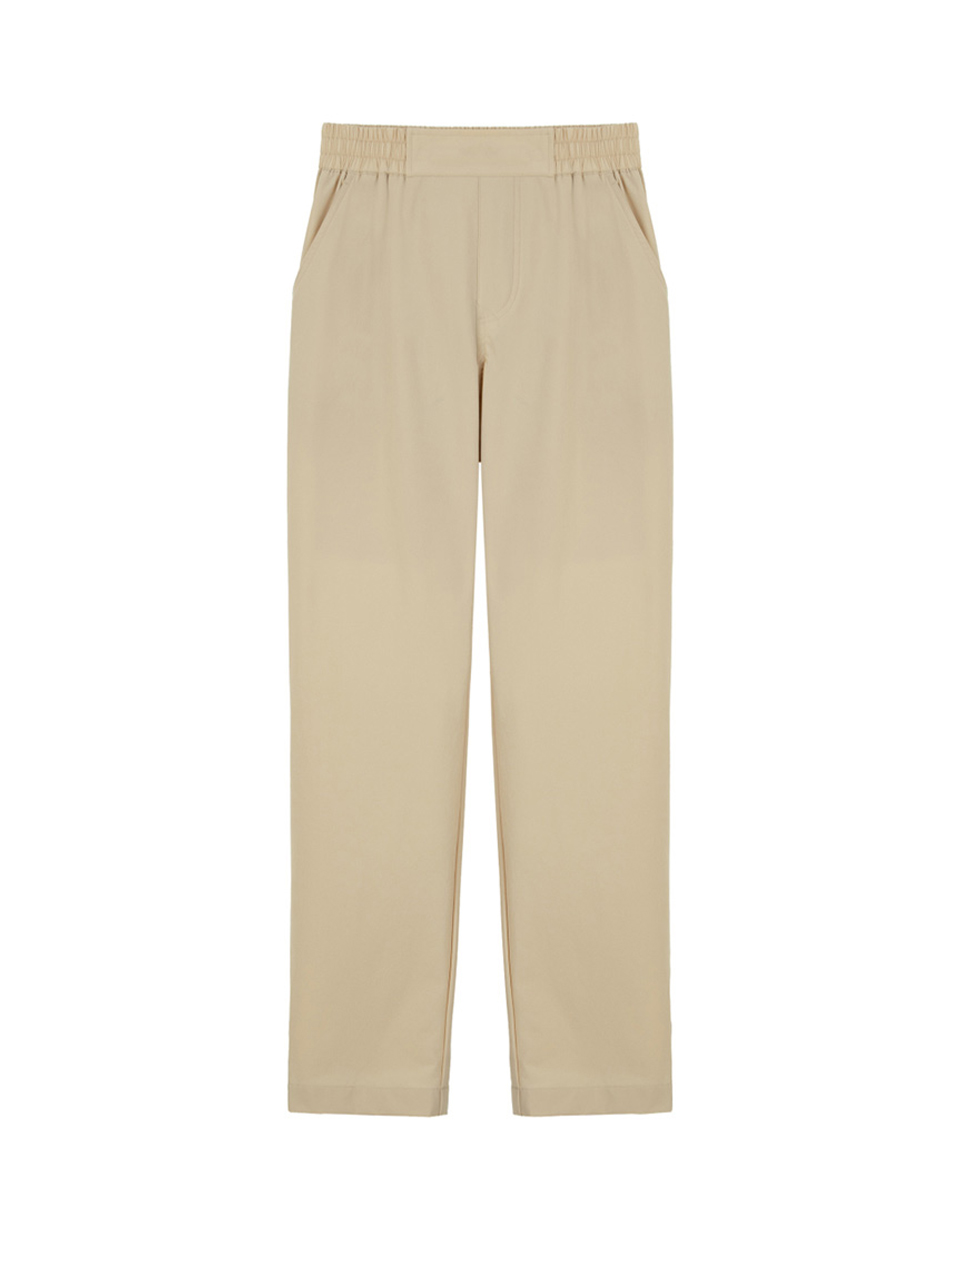 [LIMITED] SUMMER STRETCH SOLID COOL PANTS (FOR WOMAN) - RAFFIA BEIGE